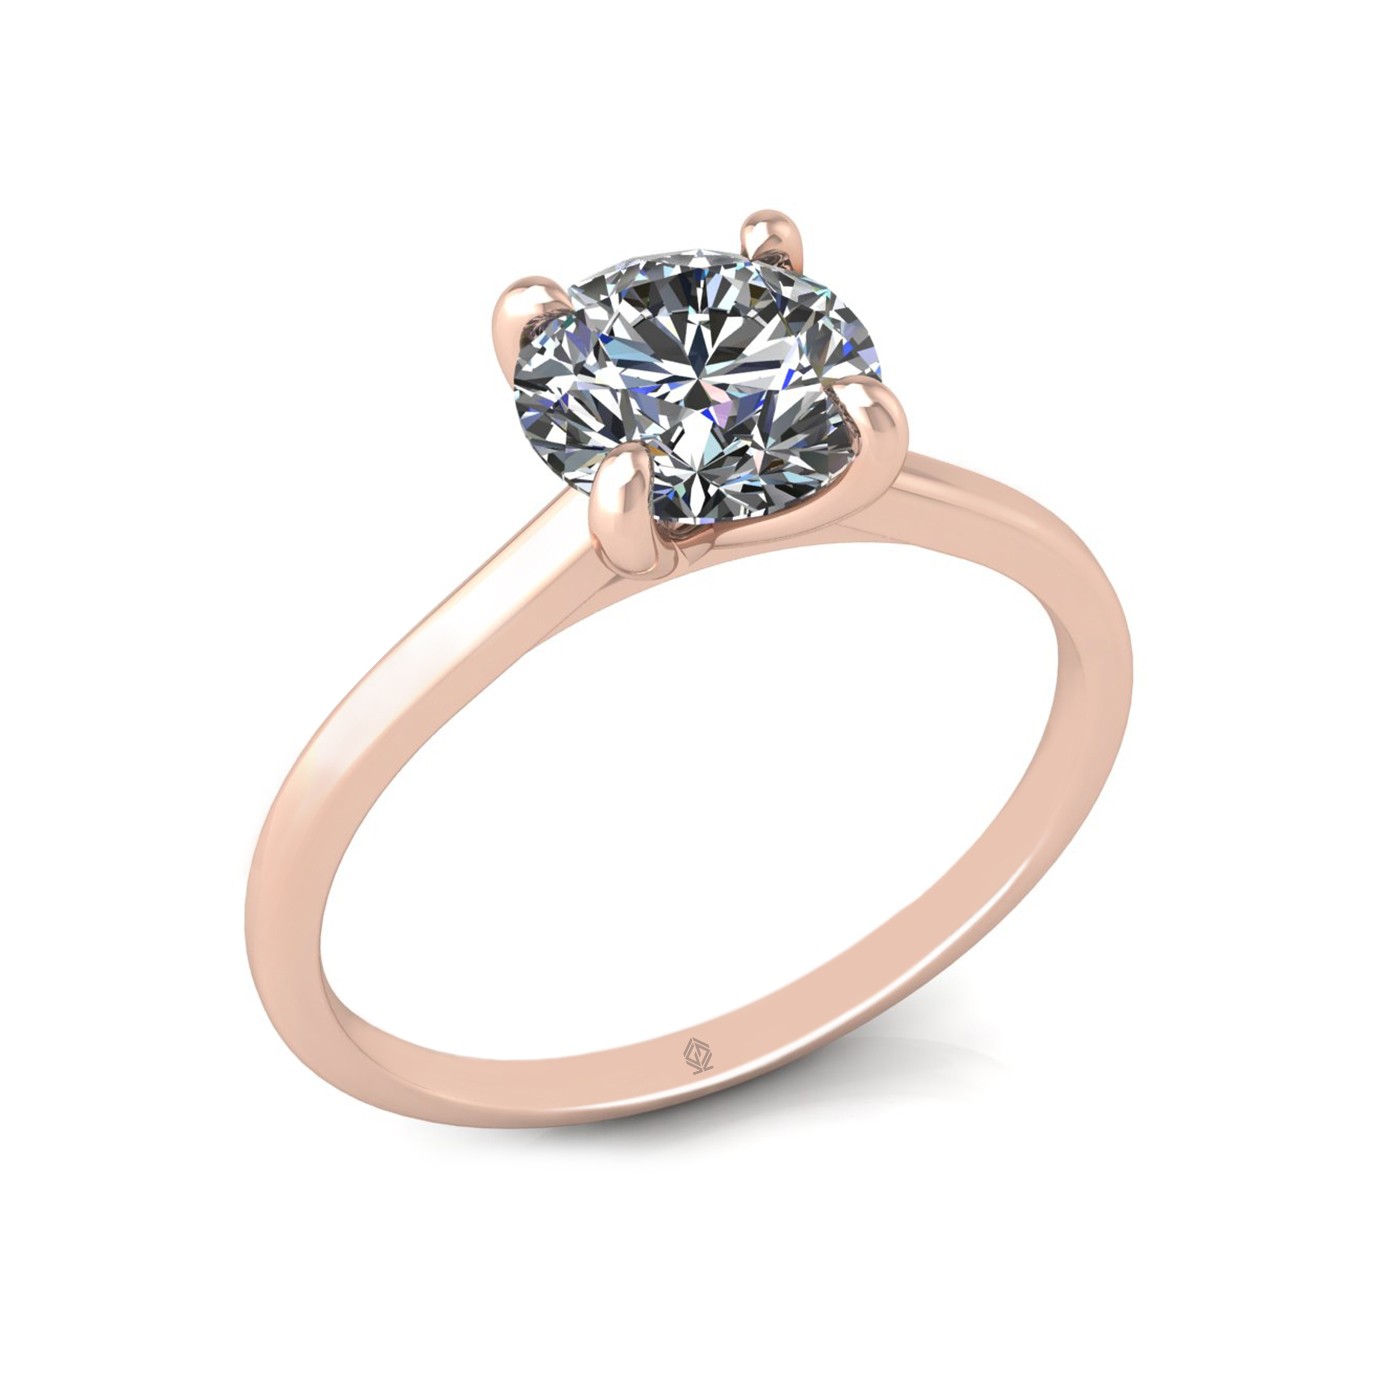 18k rose gold 1.20ct 4 prongs solitaire round cut diamond engagement ring with whisper thin band